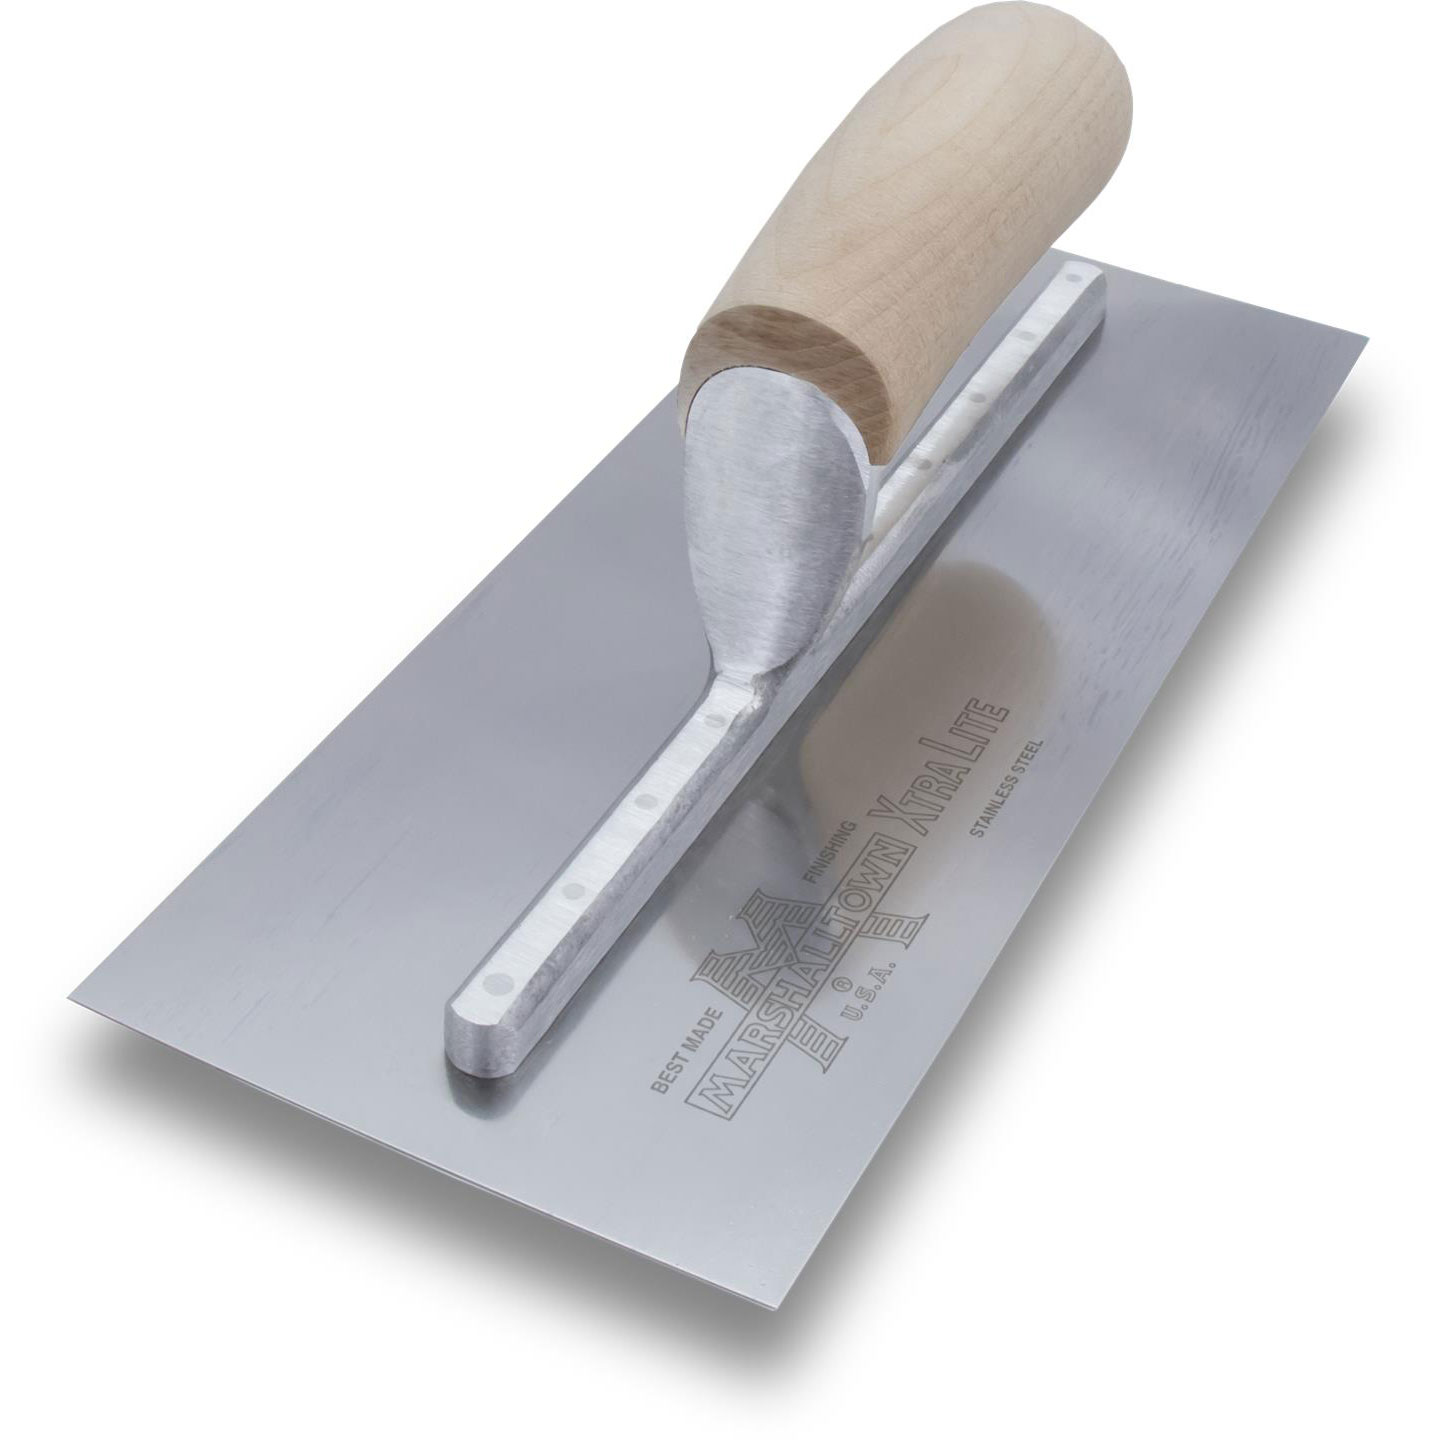 Marshalltown MXS2SS 11-1/2in x 4-1/2in Stainless Finishing Trowel with Curved Wood Handle MXS2SS